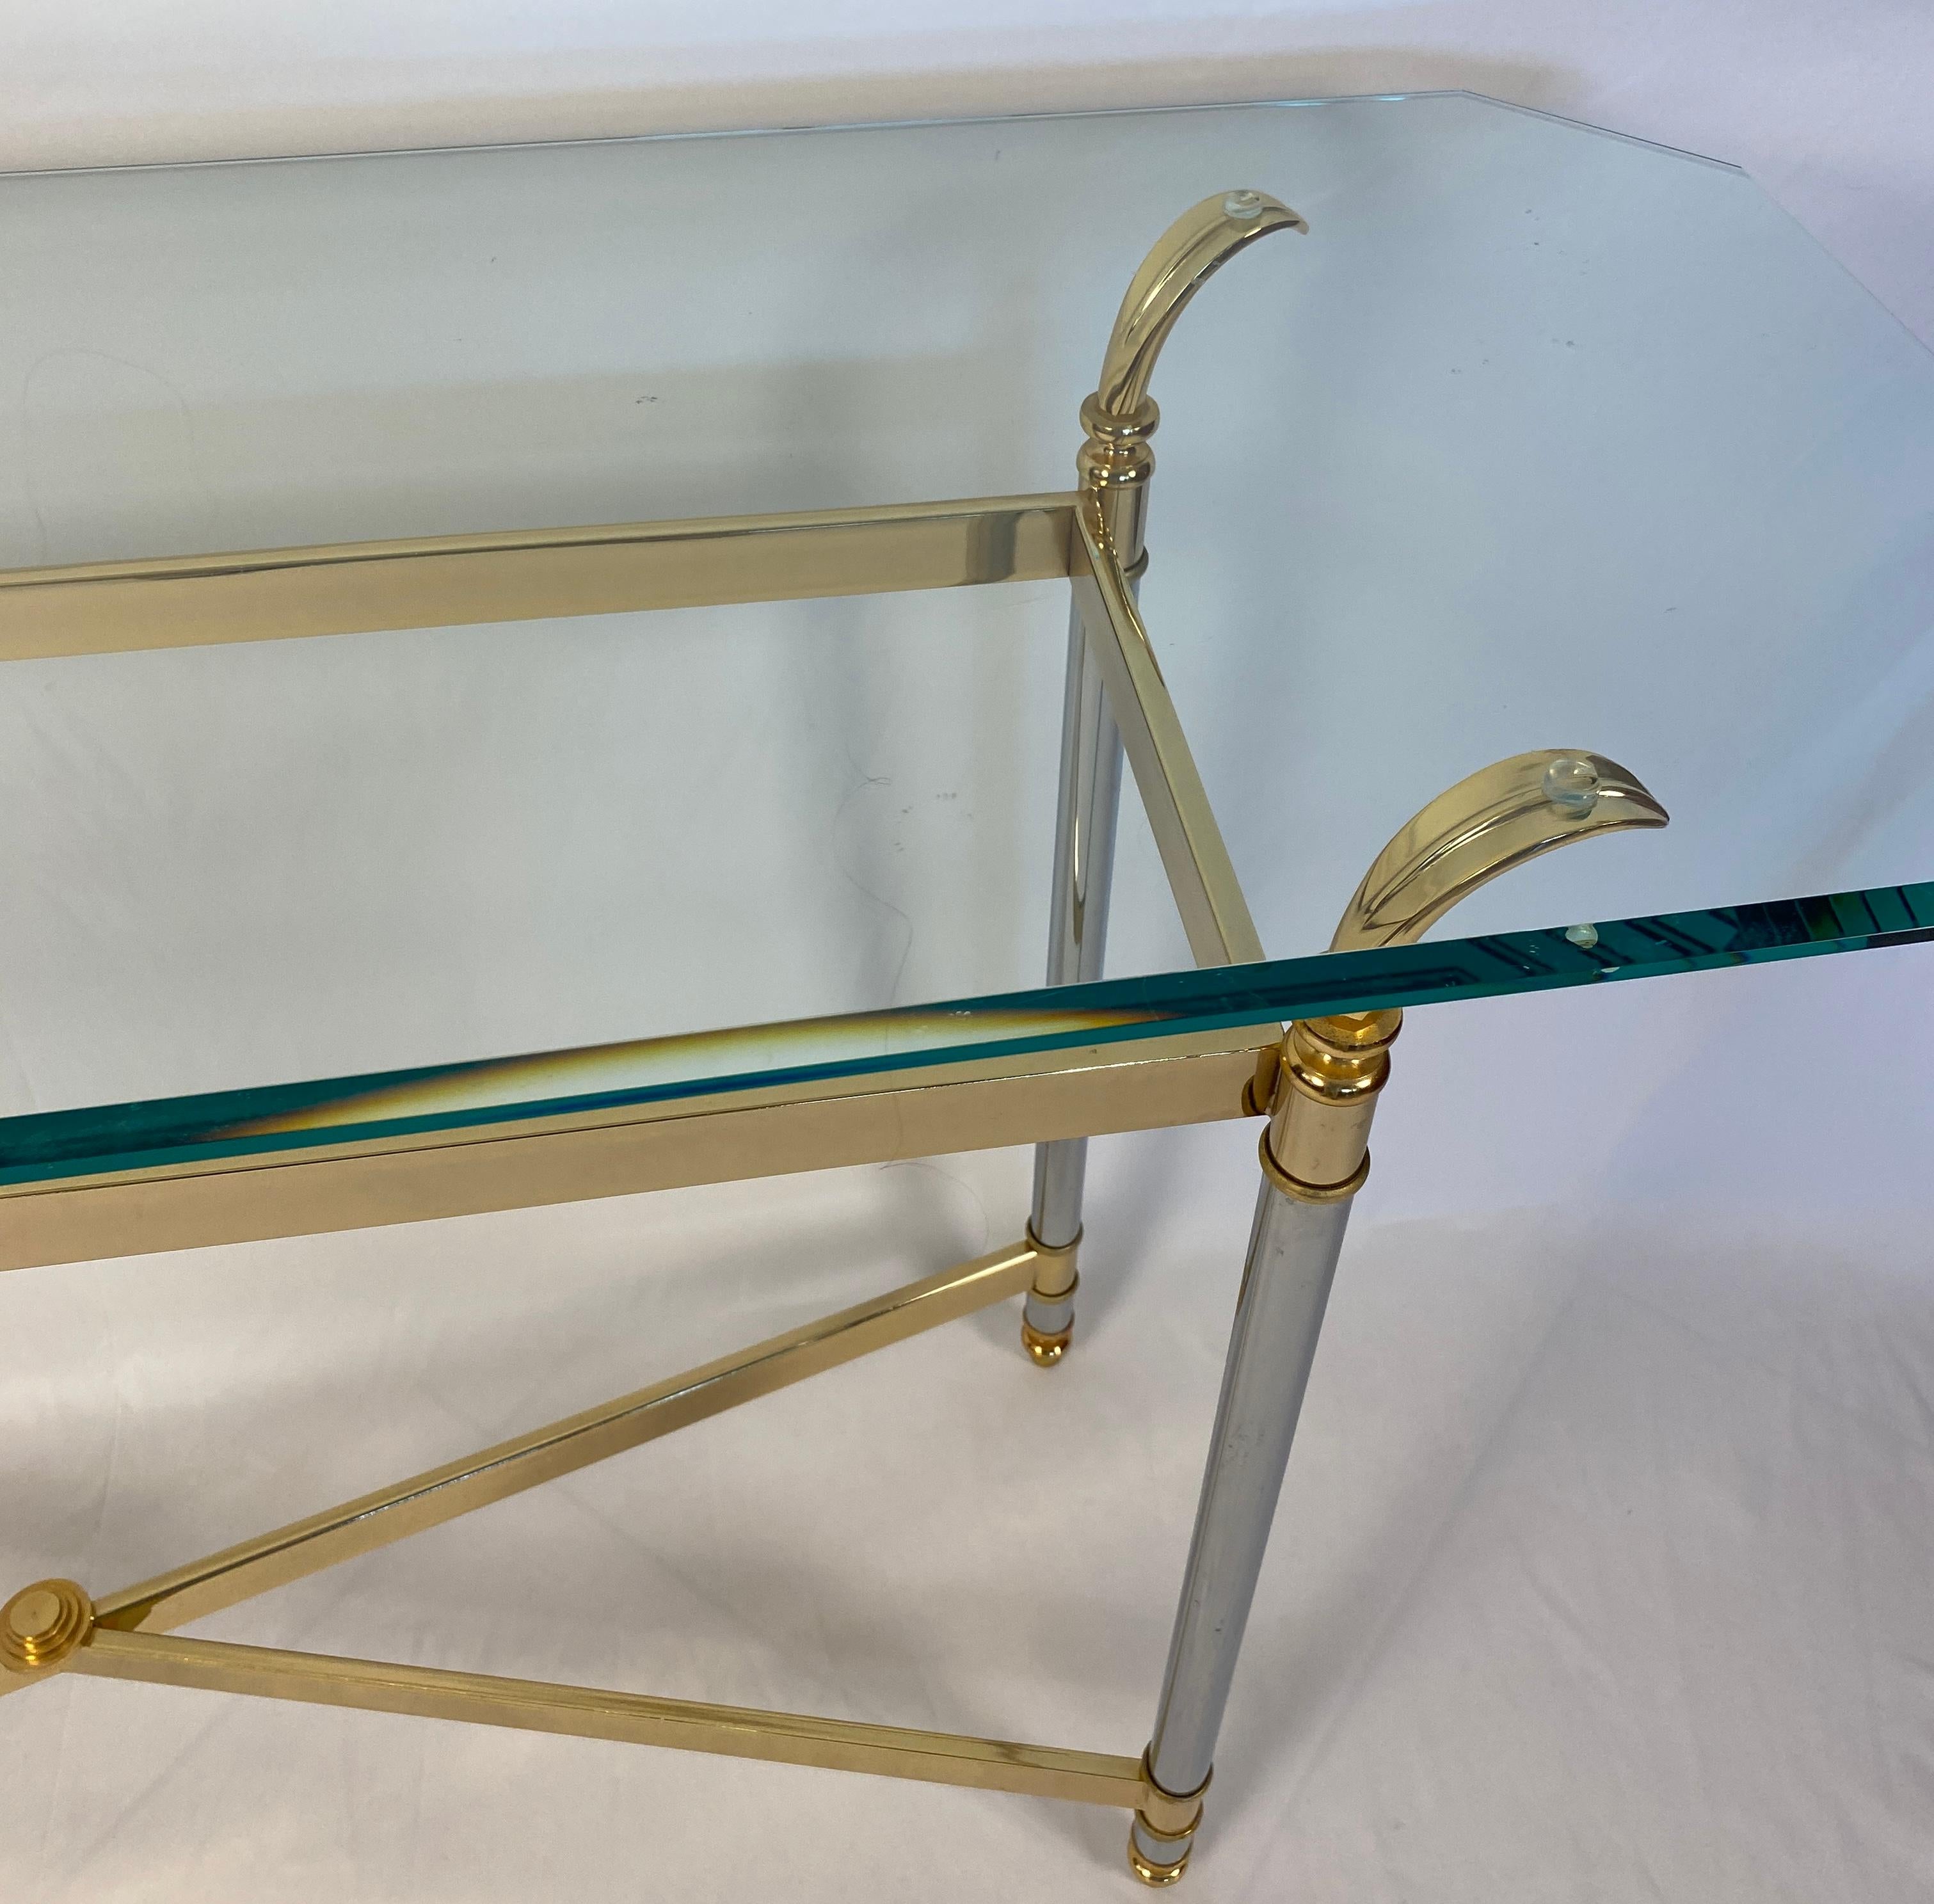 20th Century Maison Jansen Mid-Century Modern Brass and Glass Console Table or Sofa Table